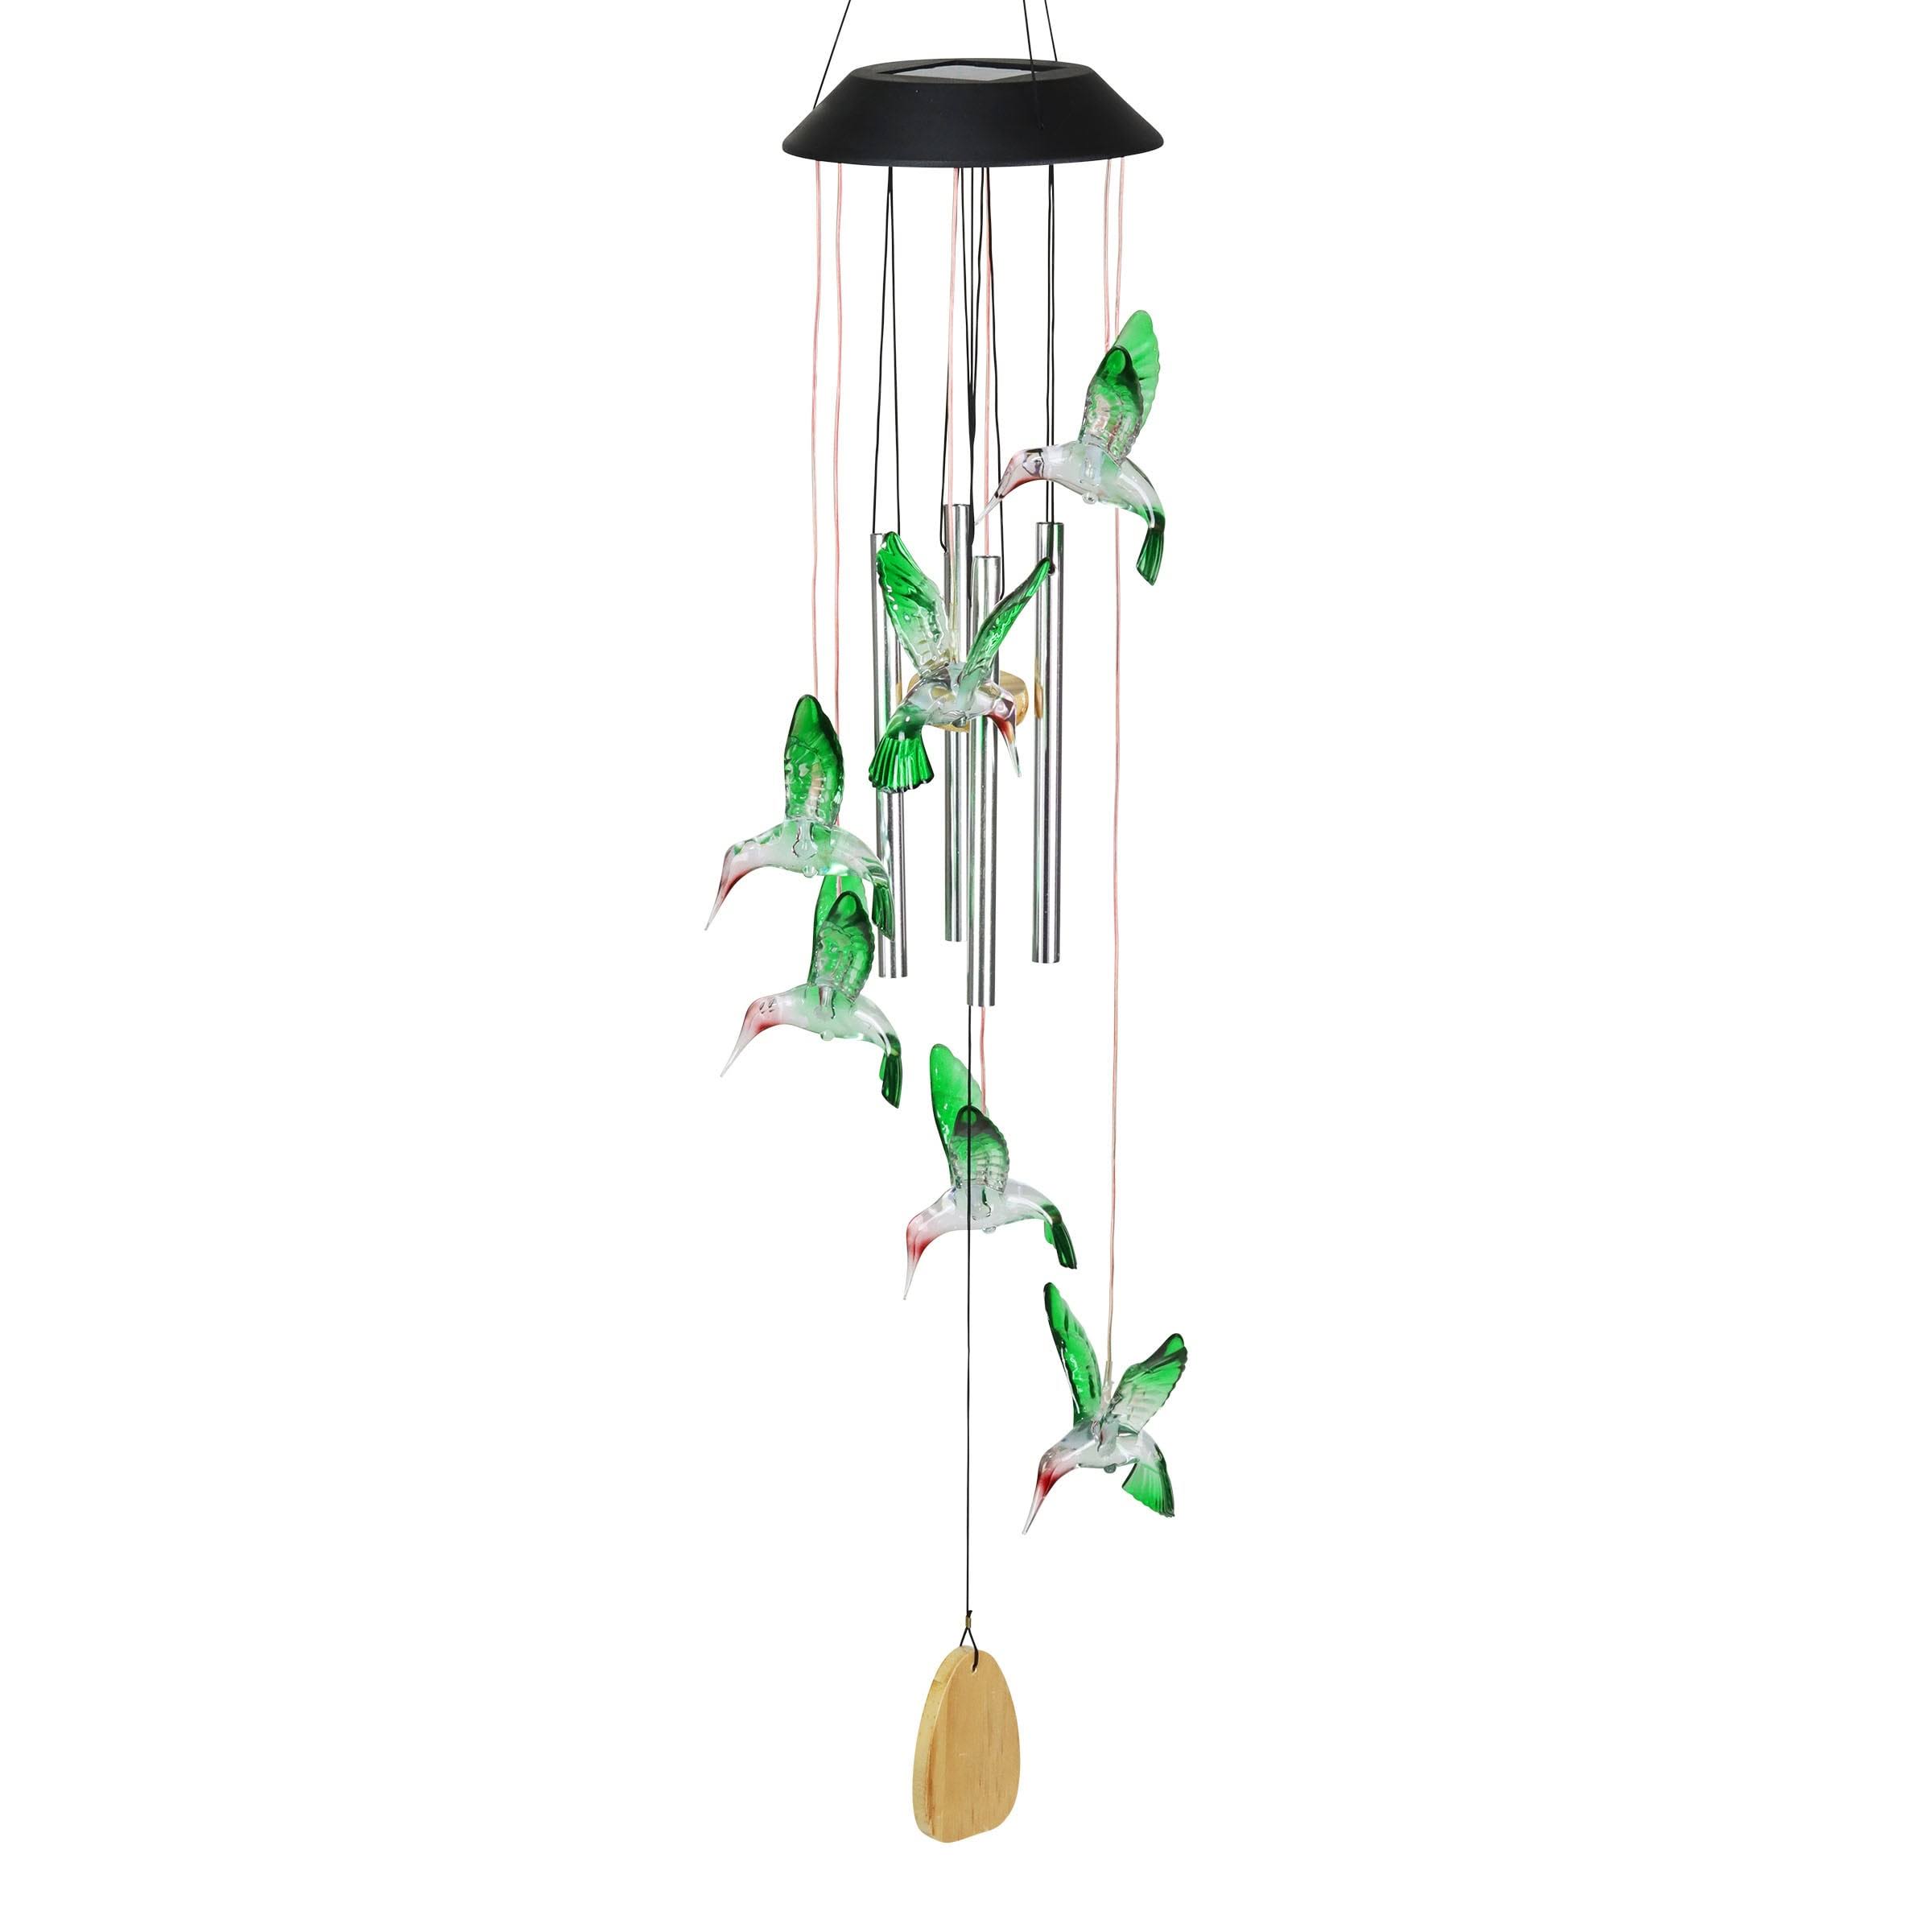 Exhart Solar Hummingbird Acrylic and Metal Wind Chime with Color Changing LED Lights, 5 by 26 Inches - Plastic - Clear